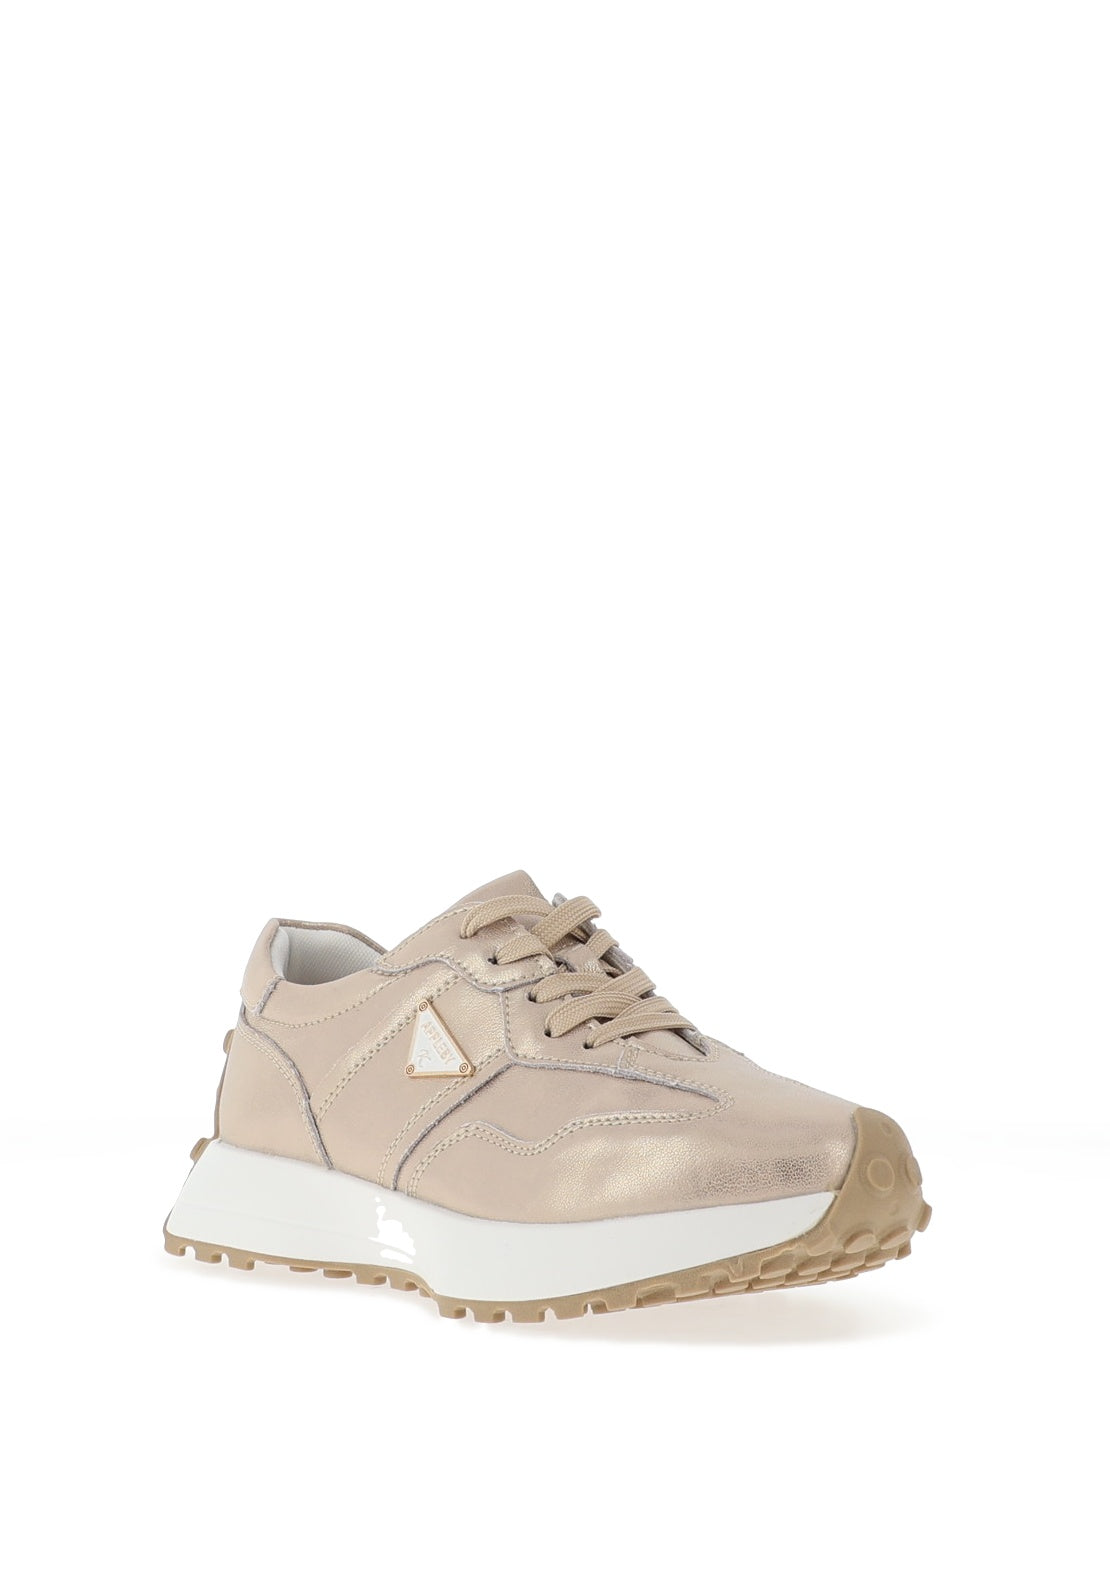 Kate Appleby Caithness Lace-Up Runners in Shell Shine Champagne